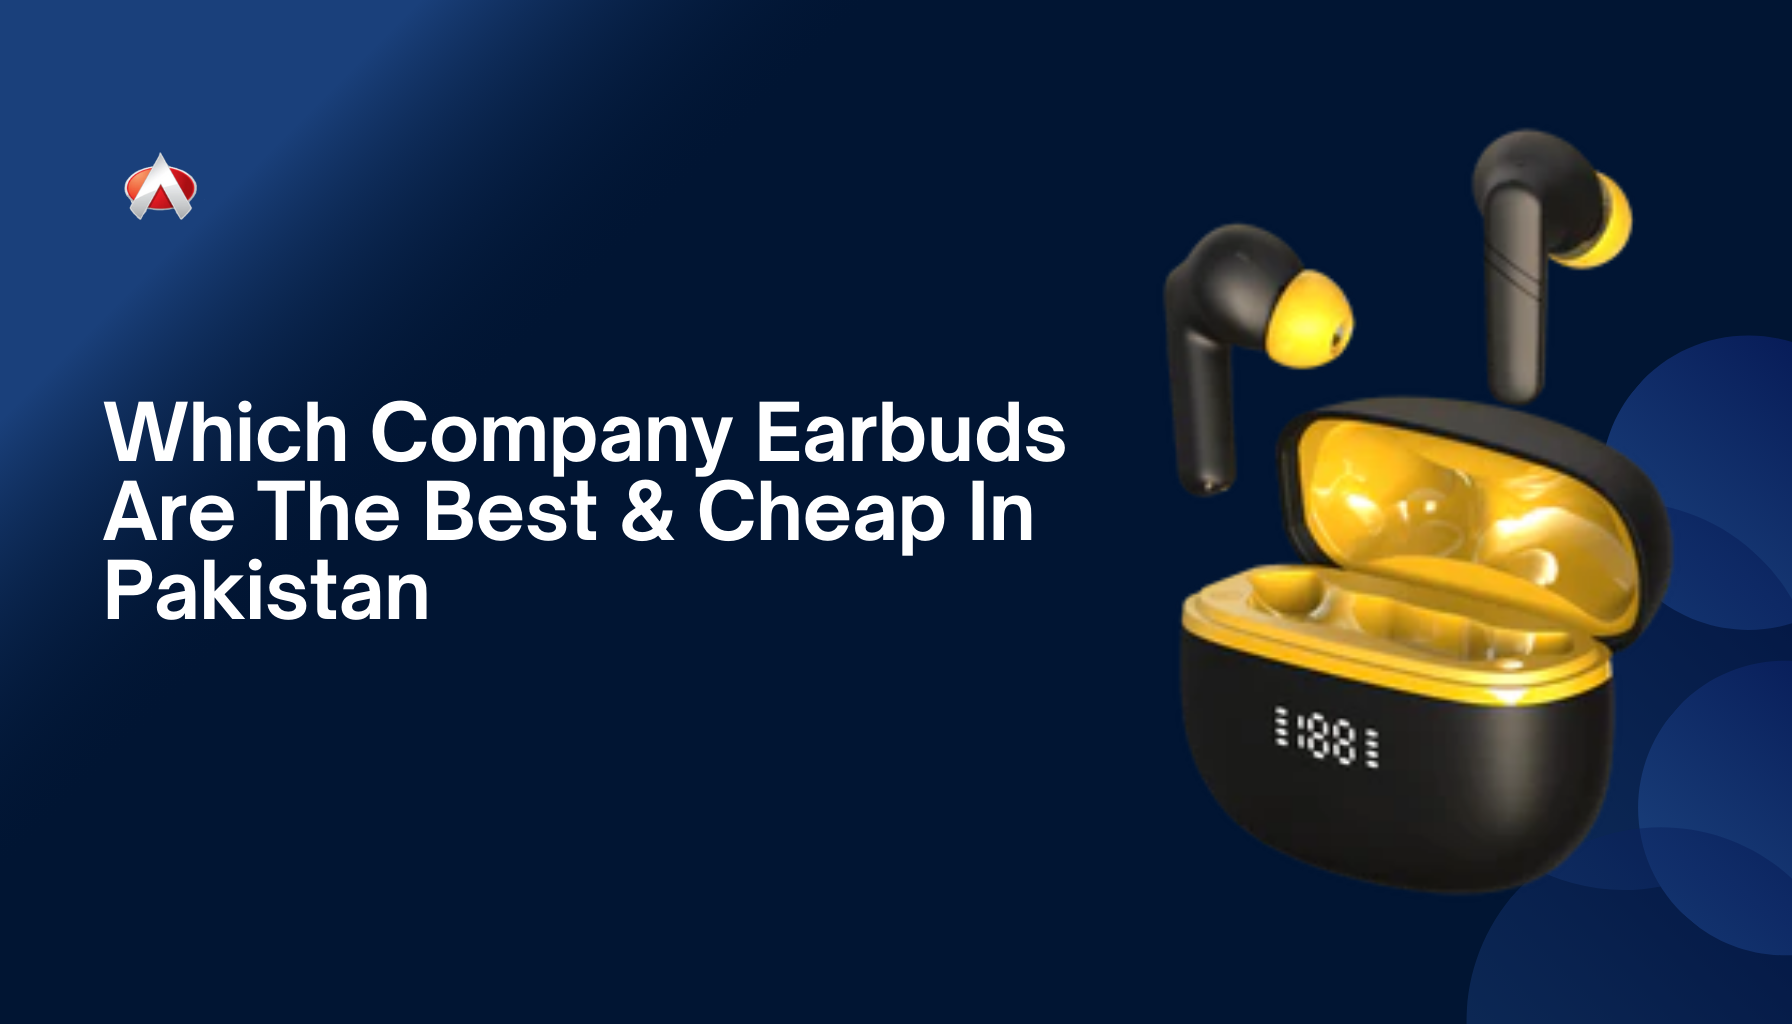 Which Company Earbuds Is The Best And Affordable In Pakistan?